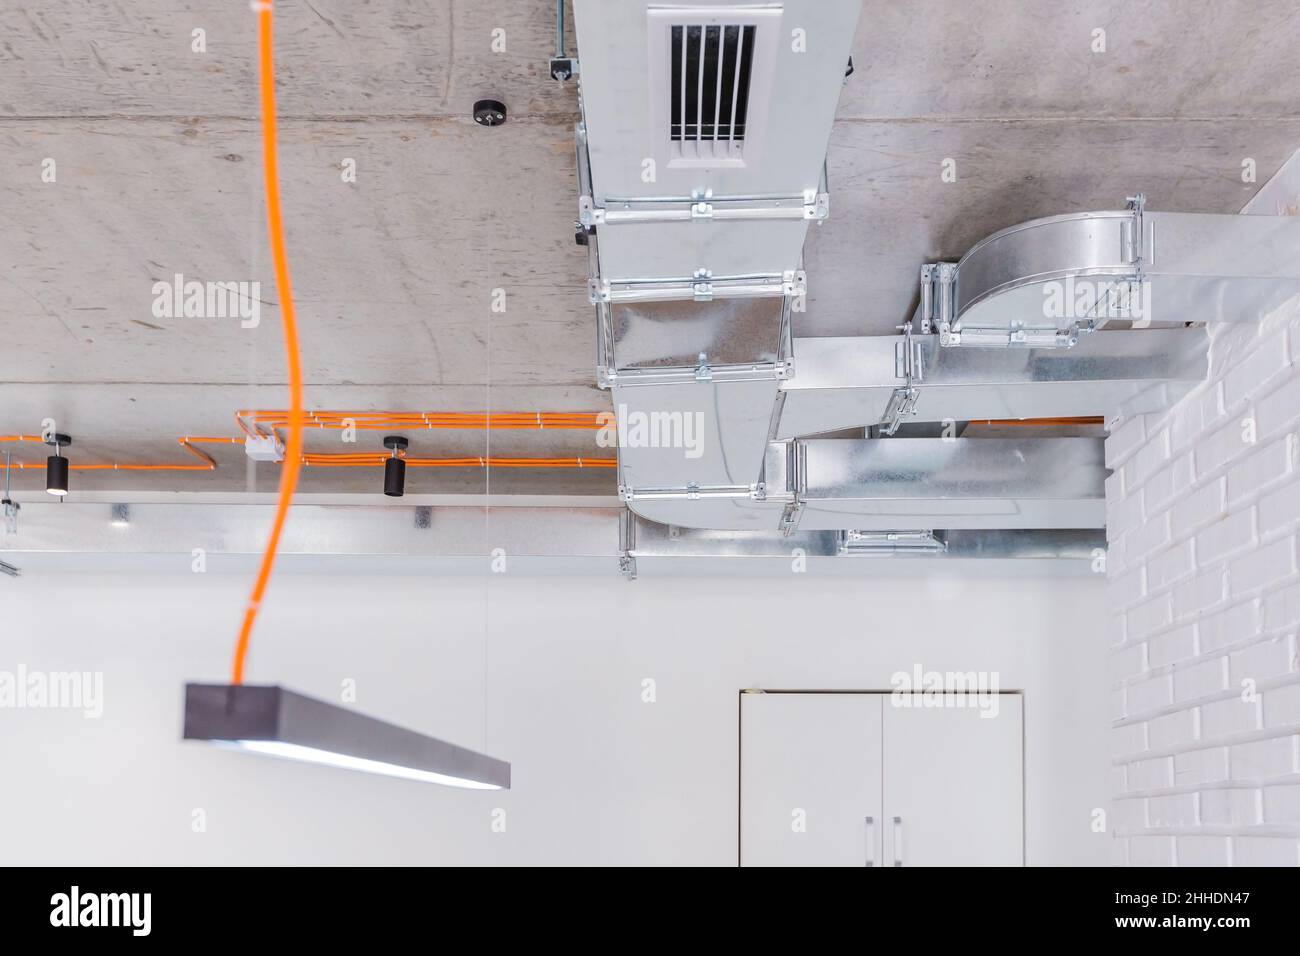 Concrete ceiling with orange electrical wiring and luminaires with ventilation ducts Stock Photo